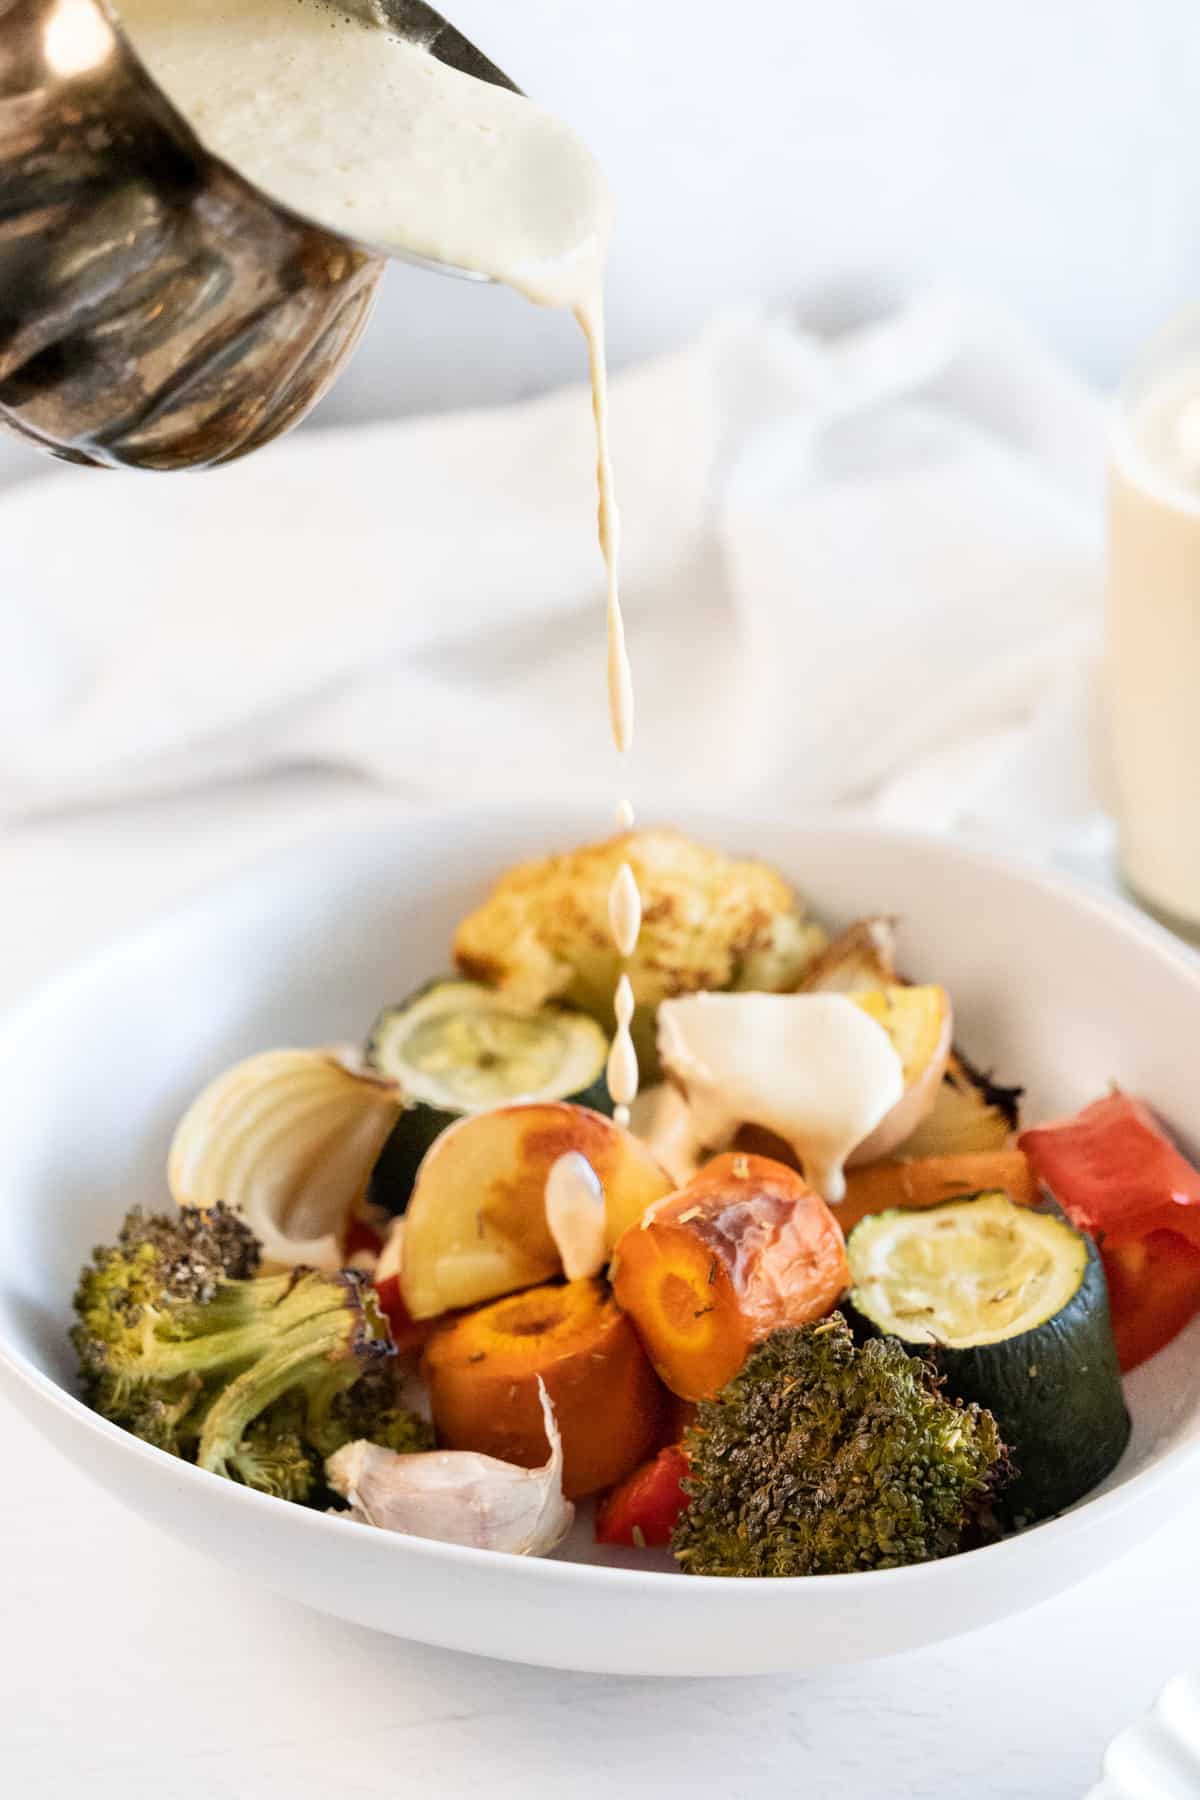 a whiteish sauce being poured over roasted vegetables